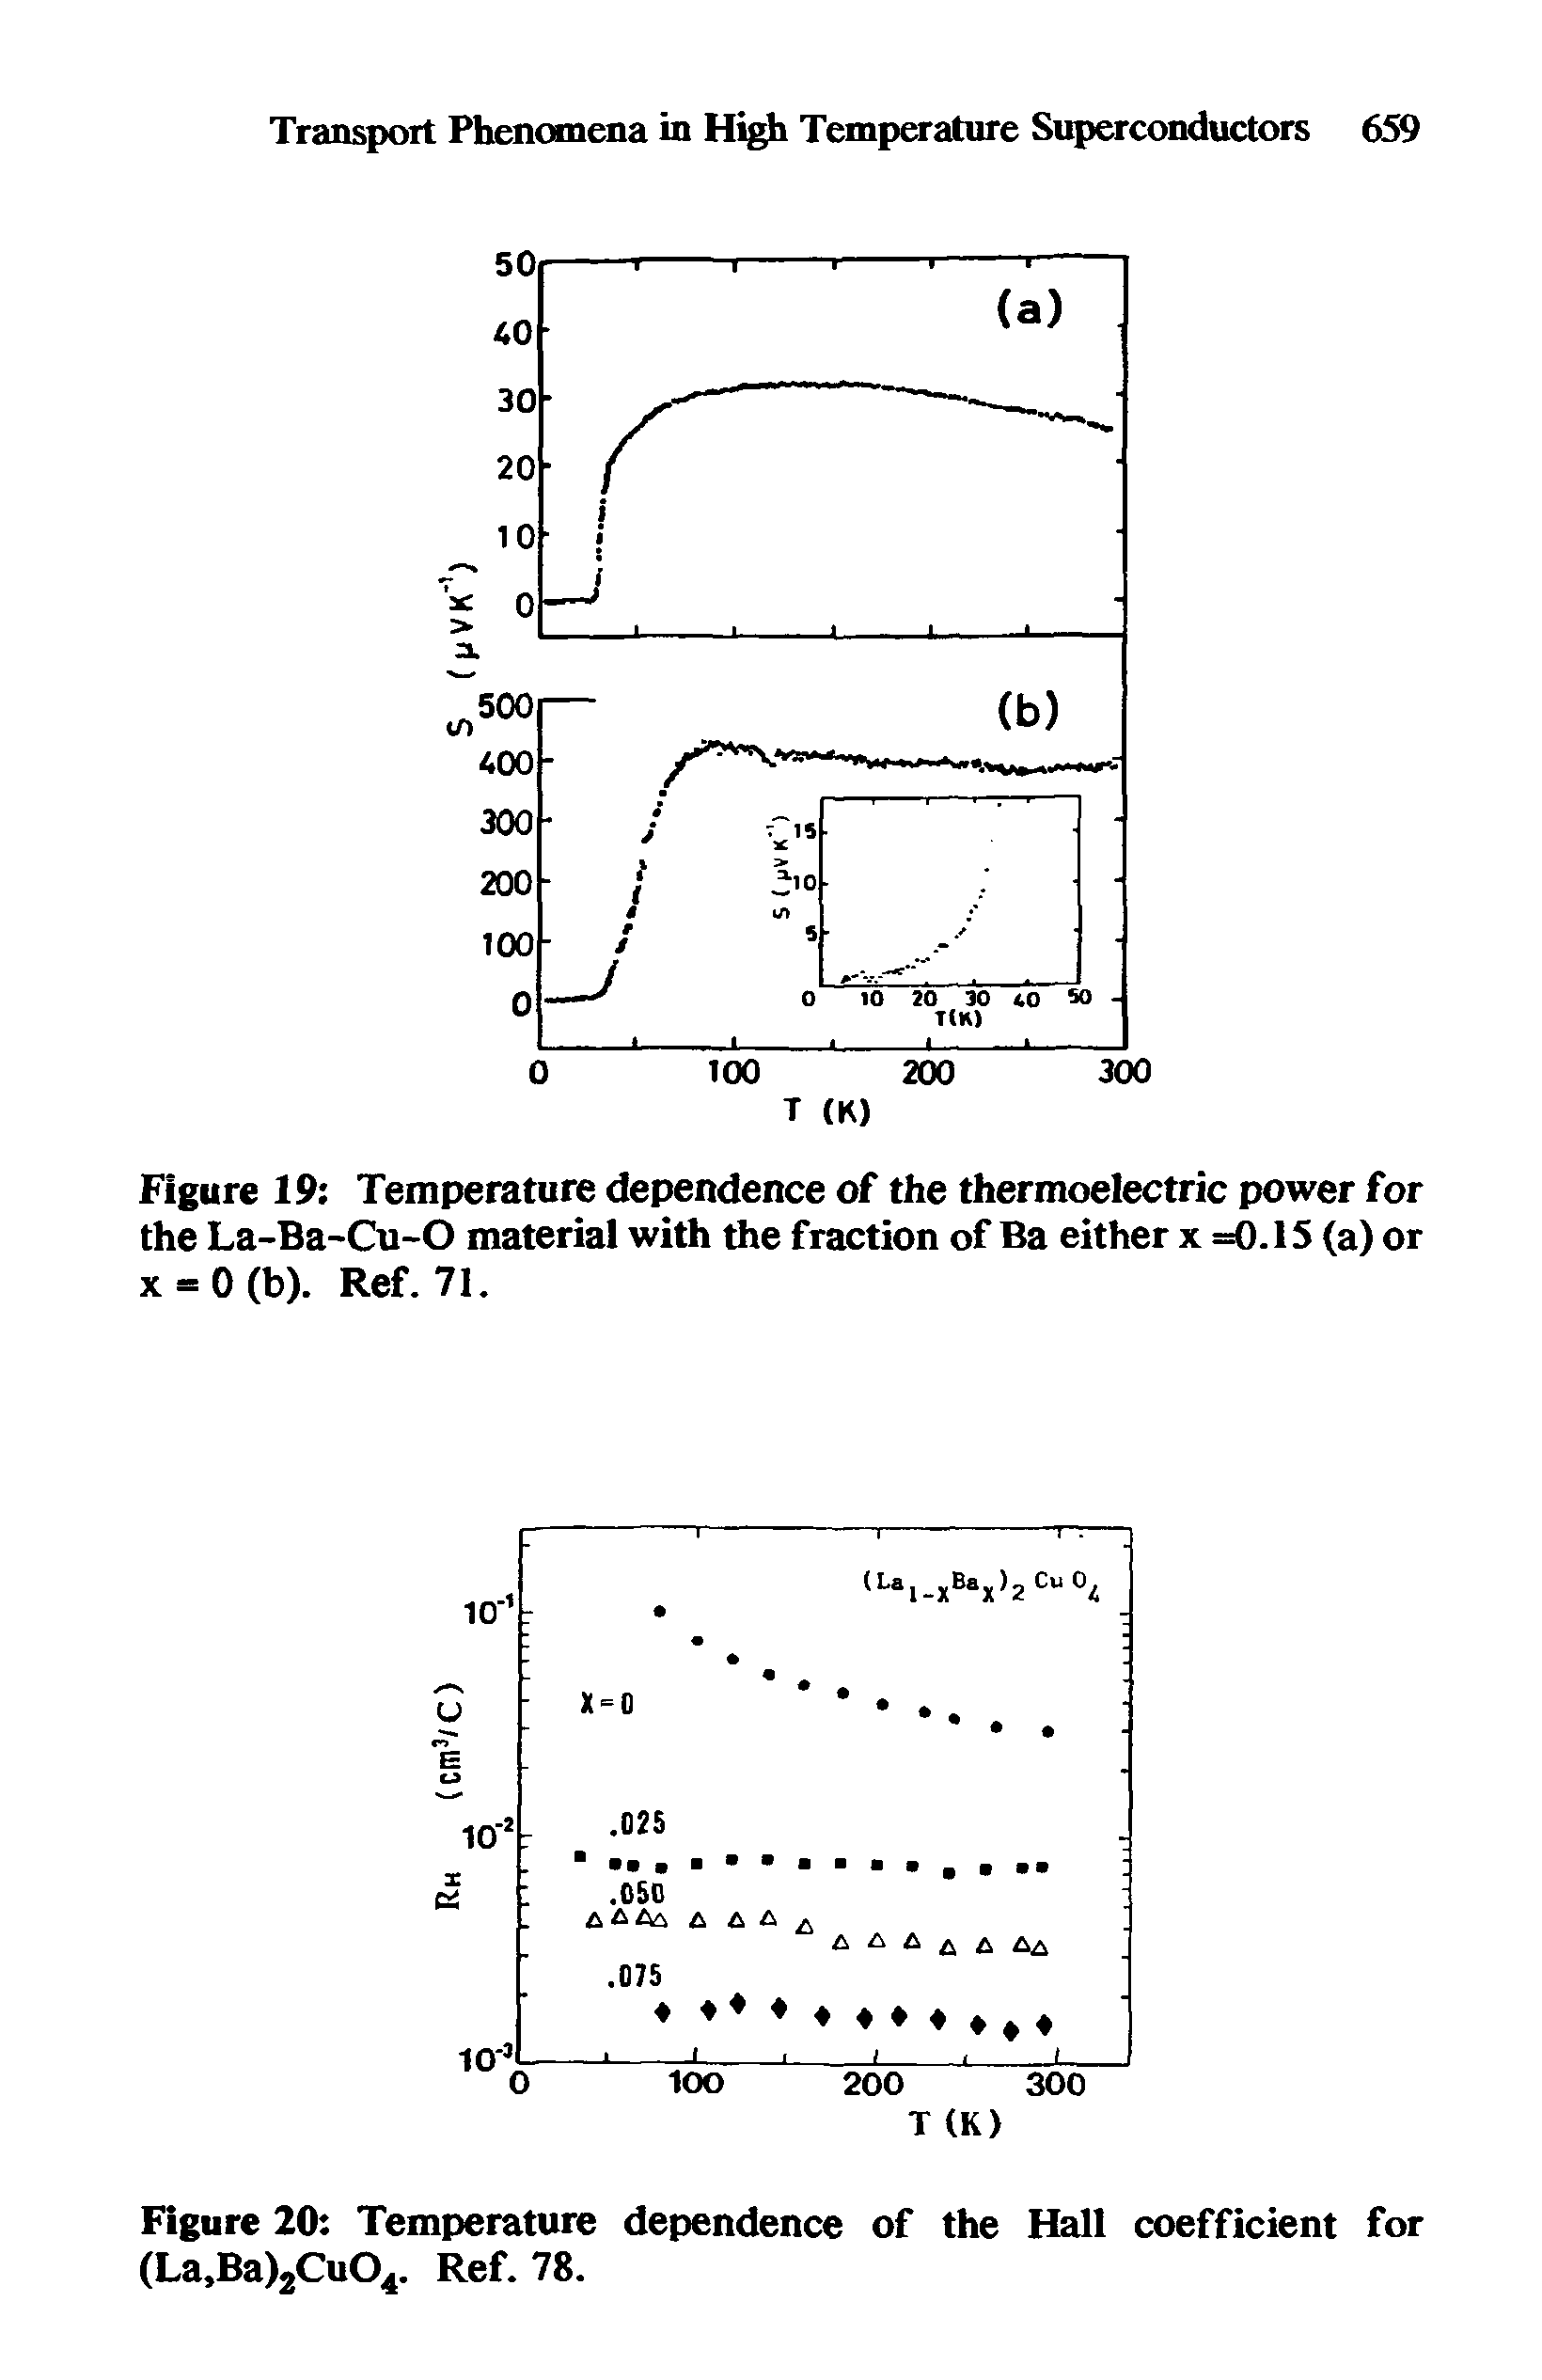 Figure 20 Temperature dependence of the Hall coefficient for (La,Ba)2Cu04. Ref. 78.